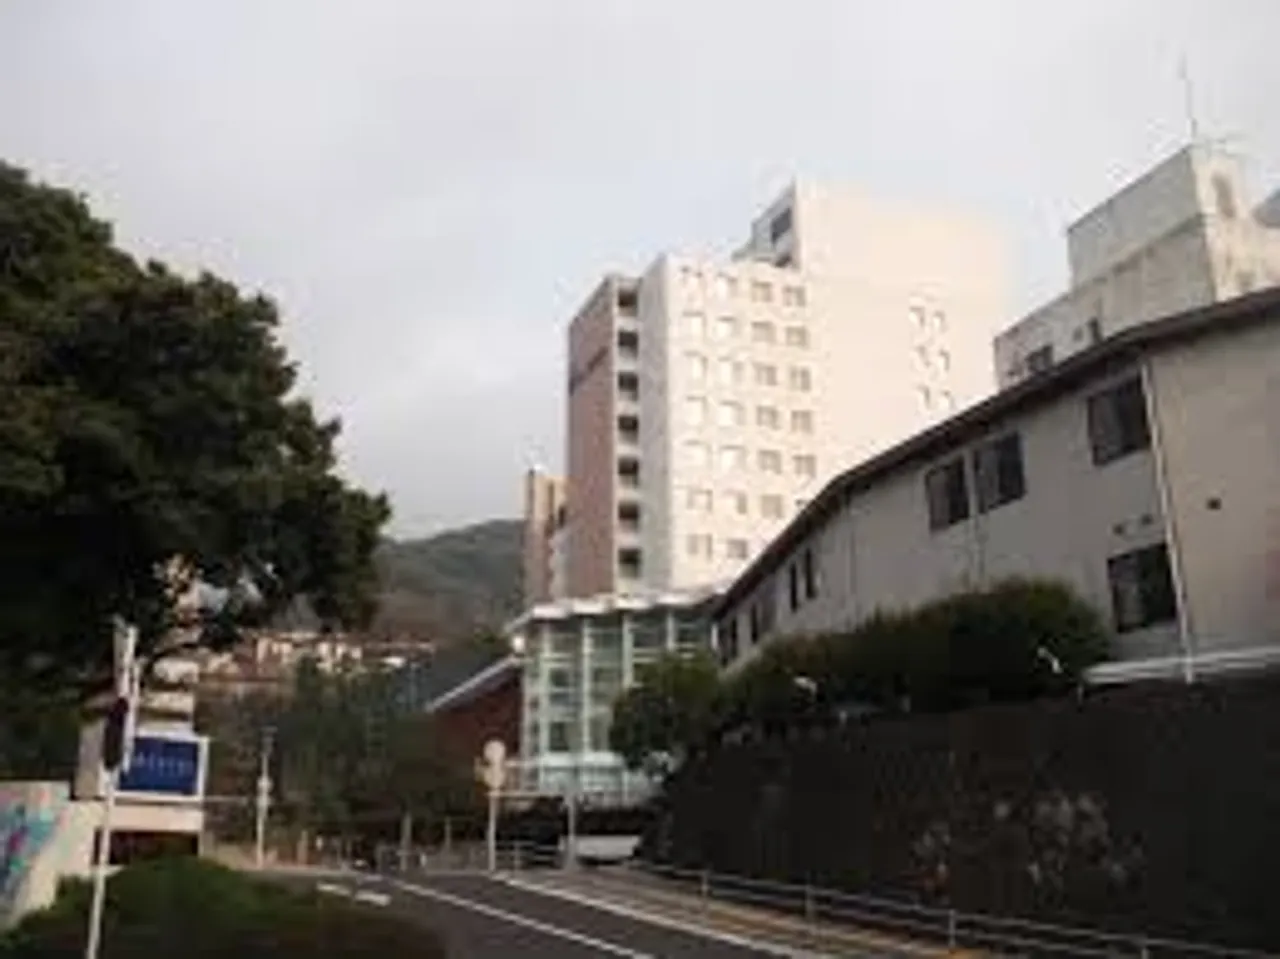 Nagasaki University Hospital Boosts Patient Care and Safety with Zebra Technologies